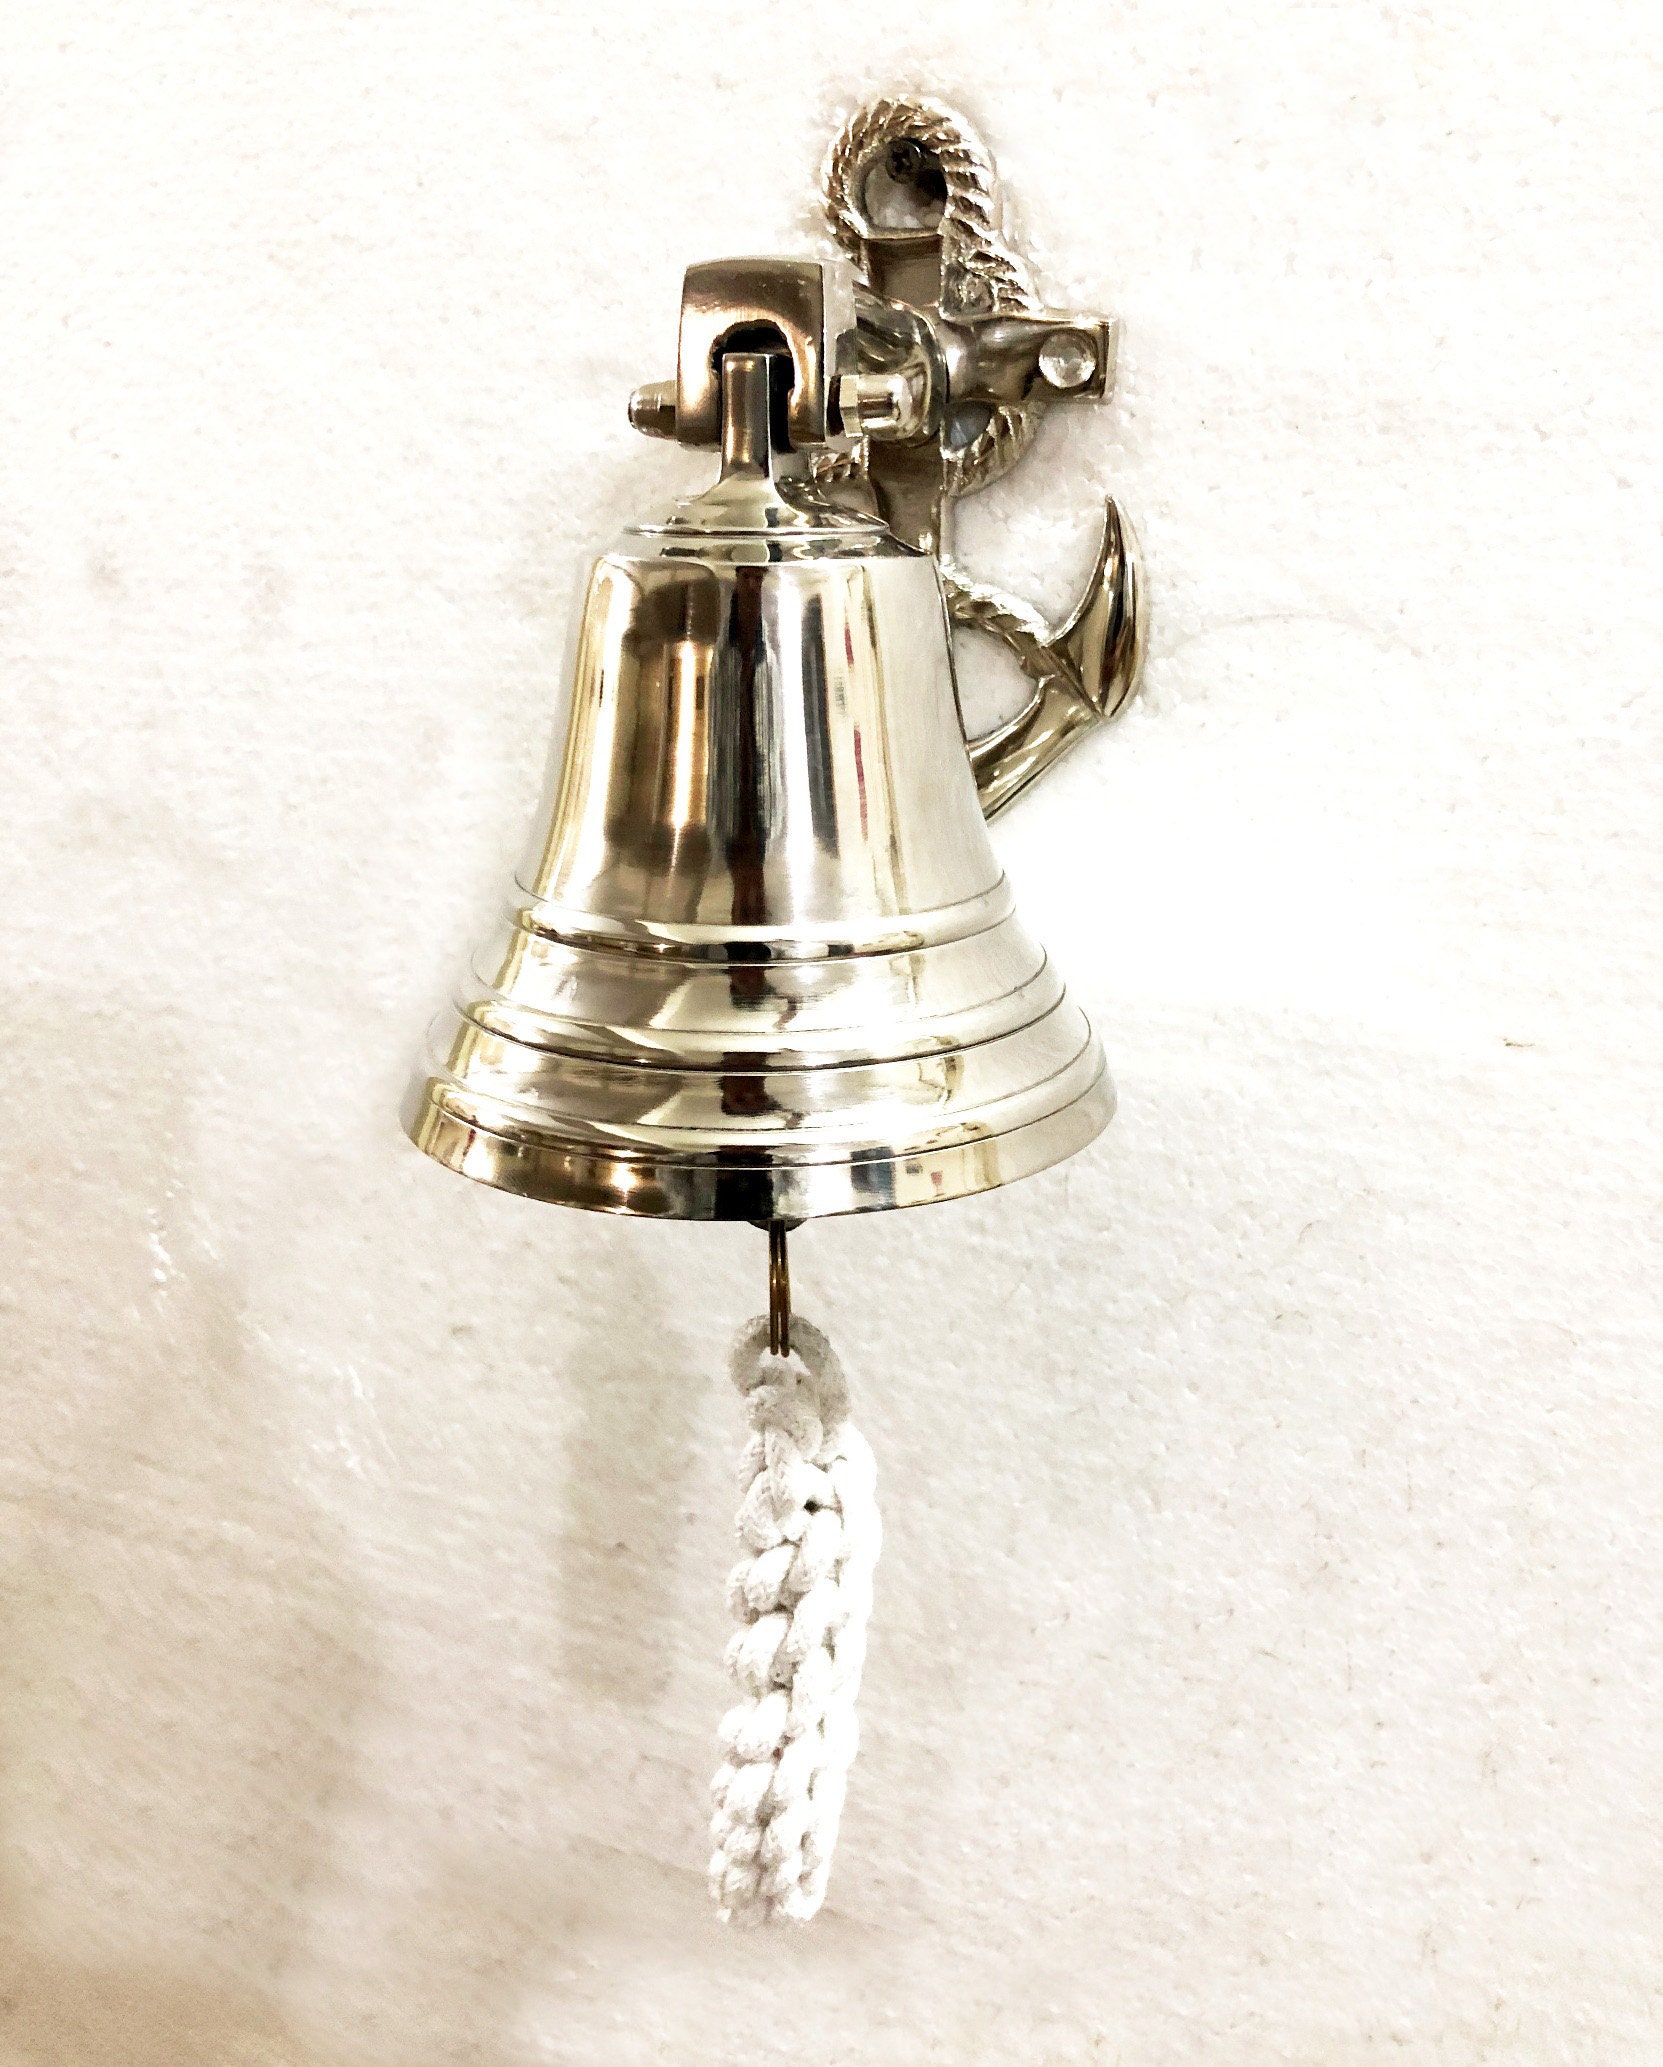 Solid Brass Chrome Finish Ship's Bell 6" Nautical Maritime Hanging Wall Decor